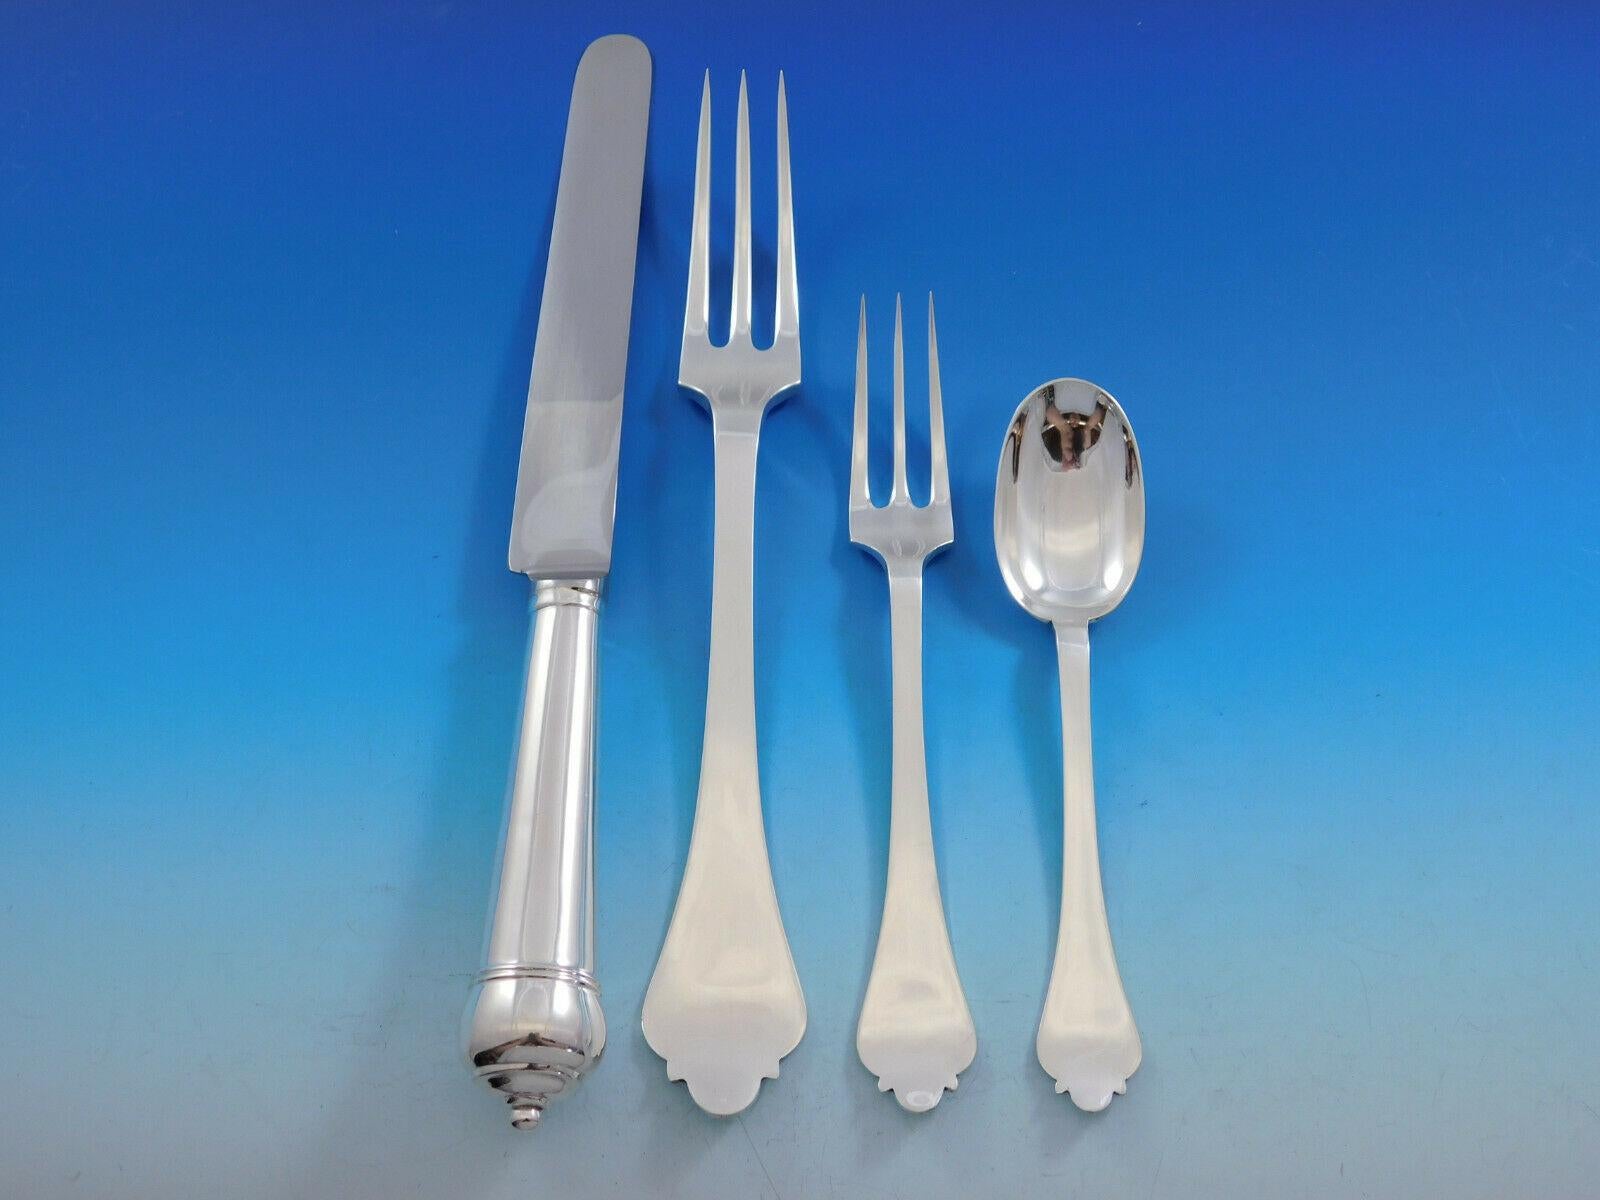 Outstanding dinner size scroll by James Robinson sterling silver flatware set, 37 pieces. This set includes:

6 dinner size knives, cannon style handle, 10 1/4